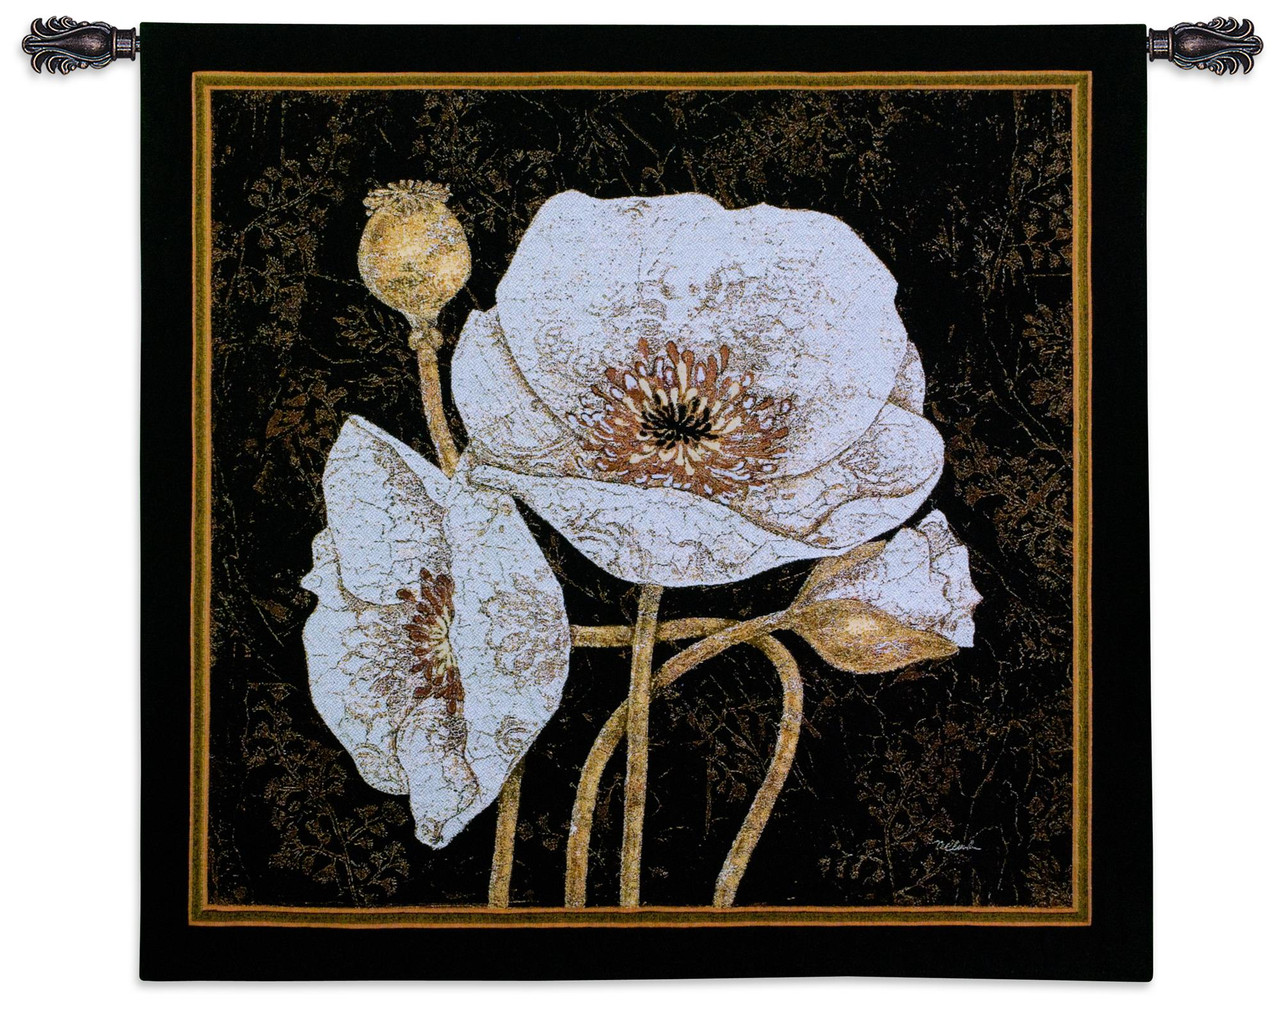 Poppies By Night By Melissa Pluch Woven Tapestry Wall Art Hanging Colorful Blooming White Poppy Artwork 100 Cotton Usa Size 44x44